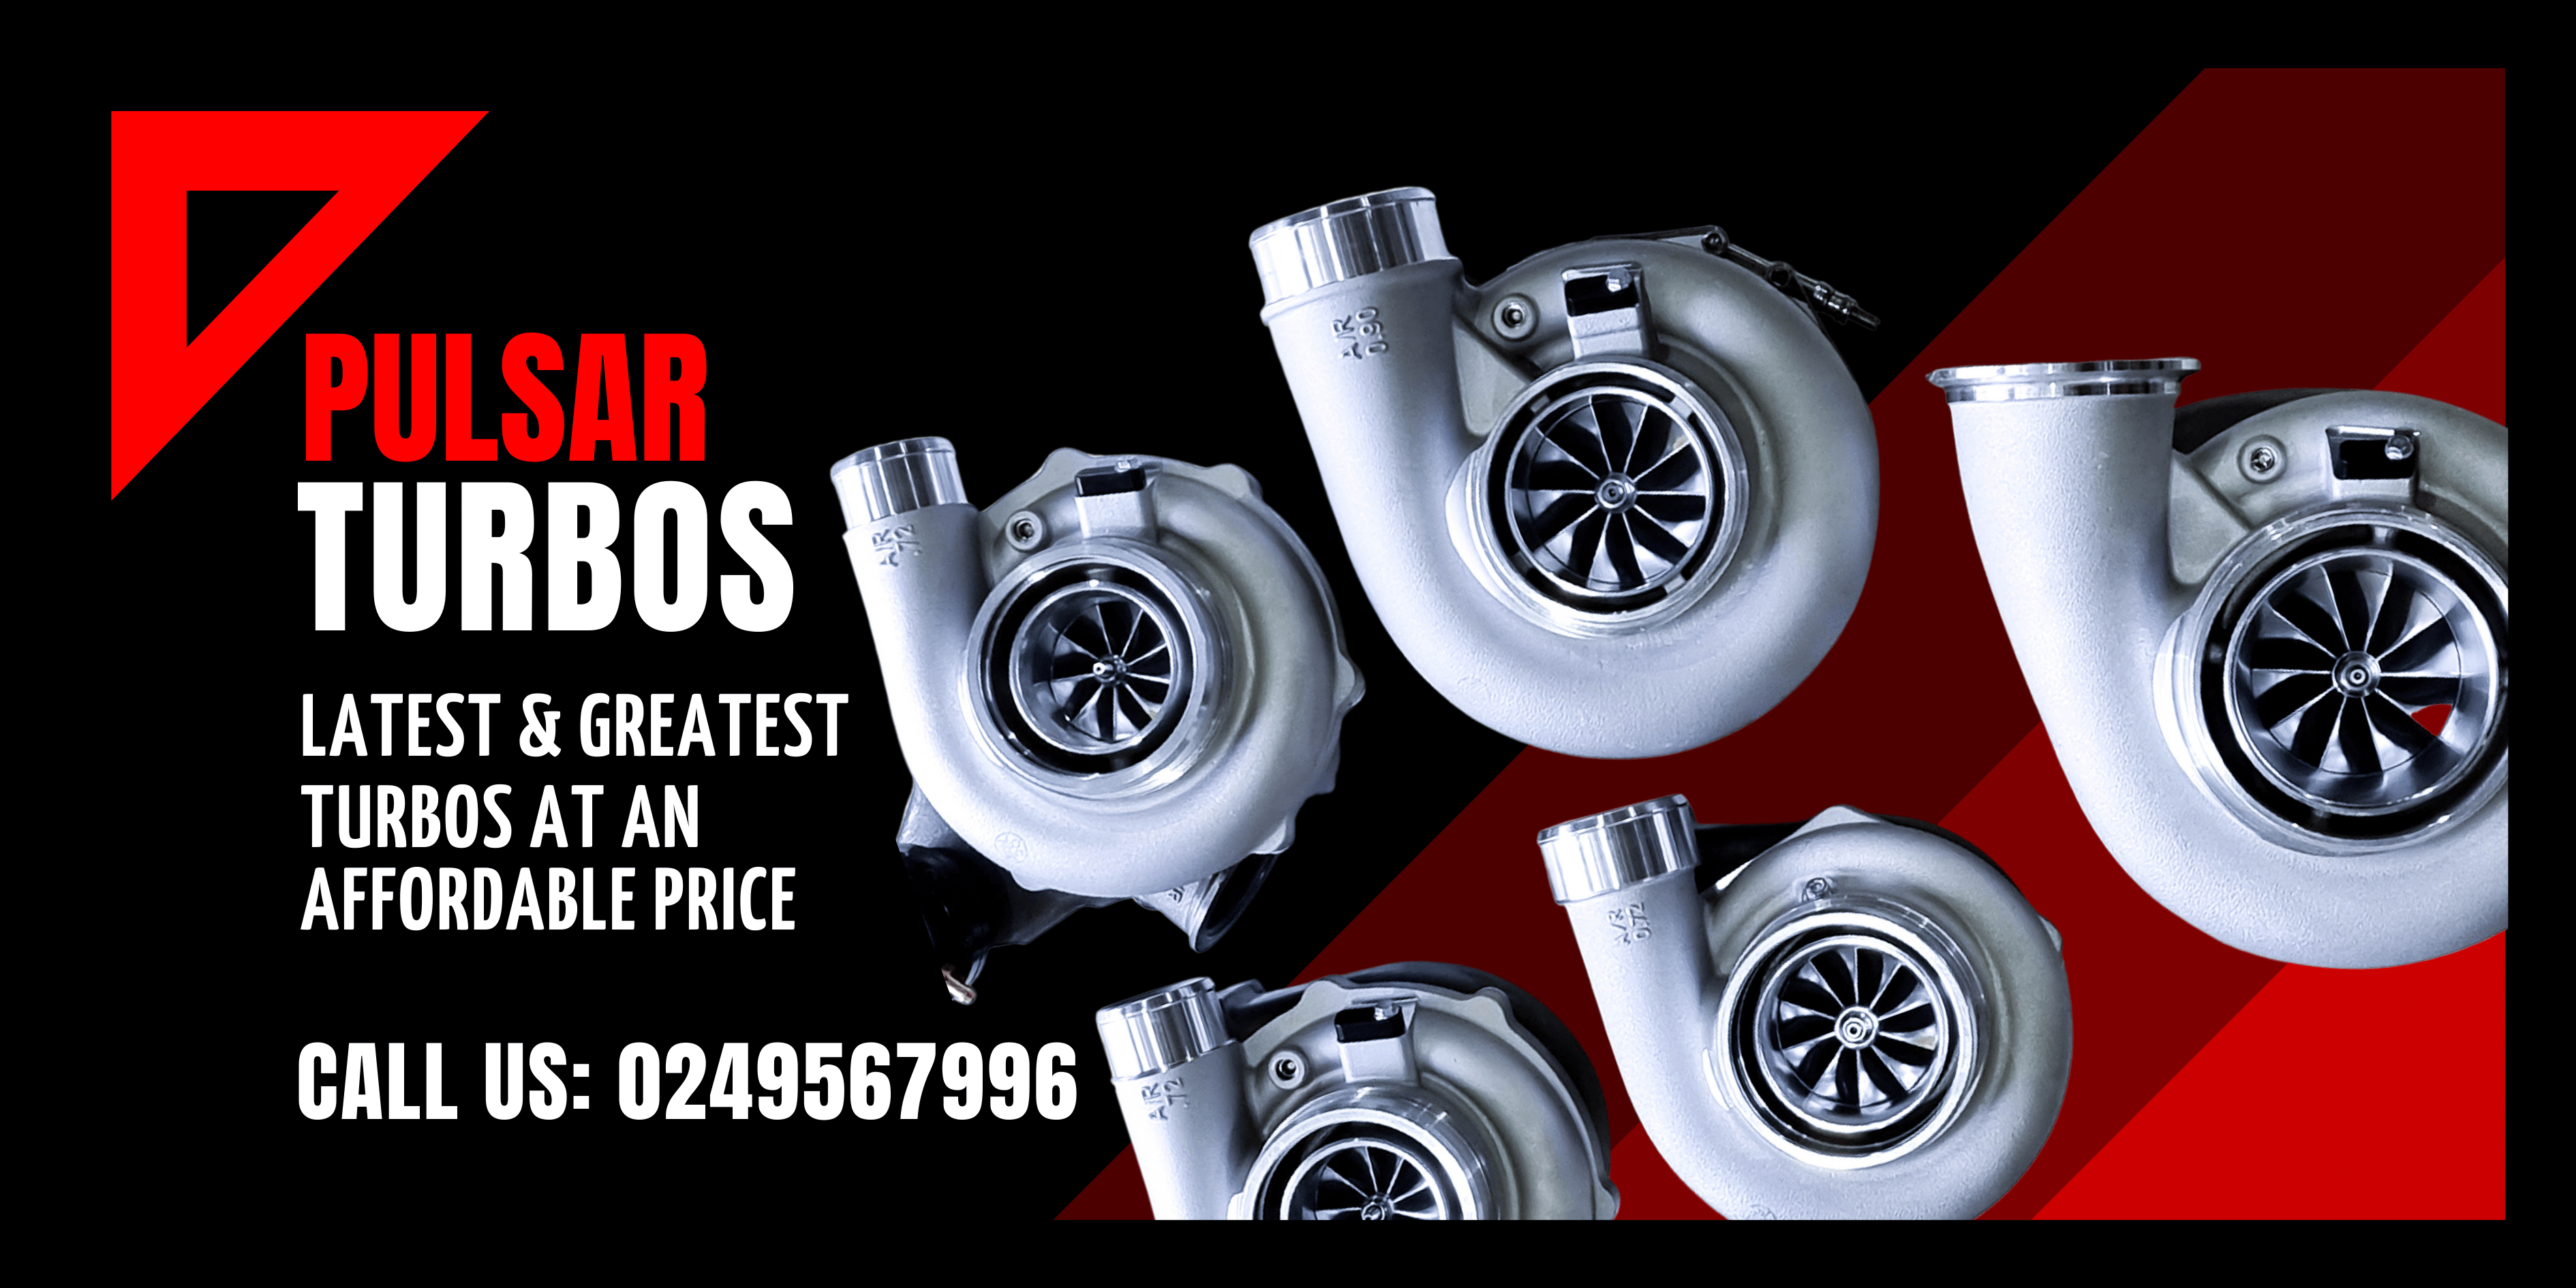 WE SELL PULSAR TURBOS- THE LATEST & GREATEST TURBOS AT AN AFFORDABLE PRICE